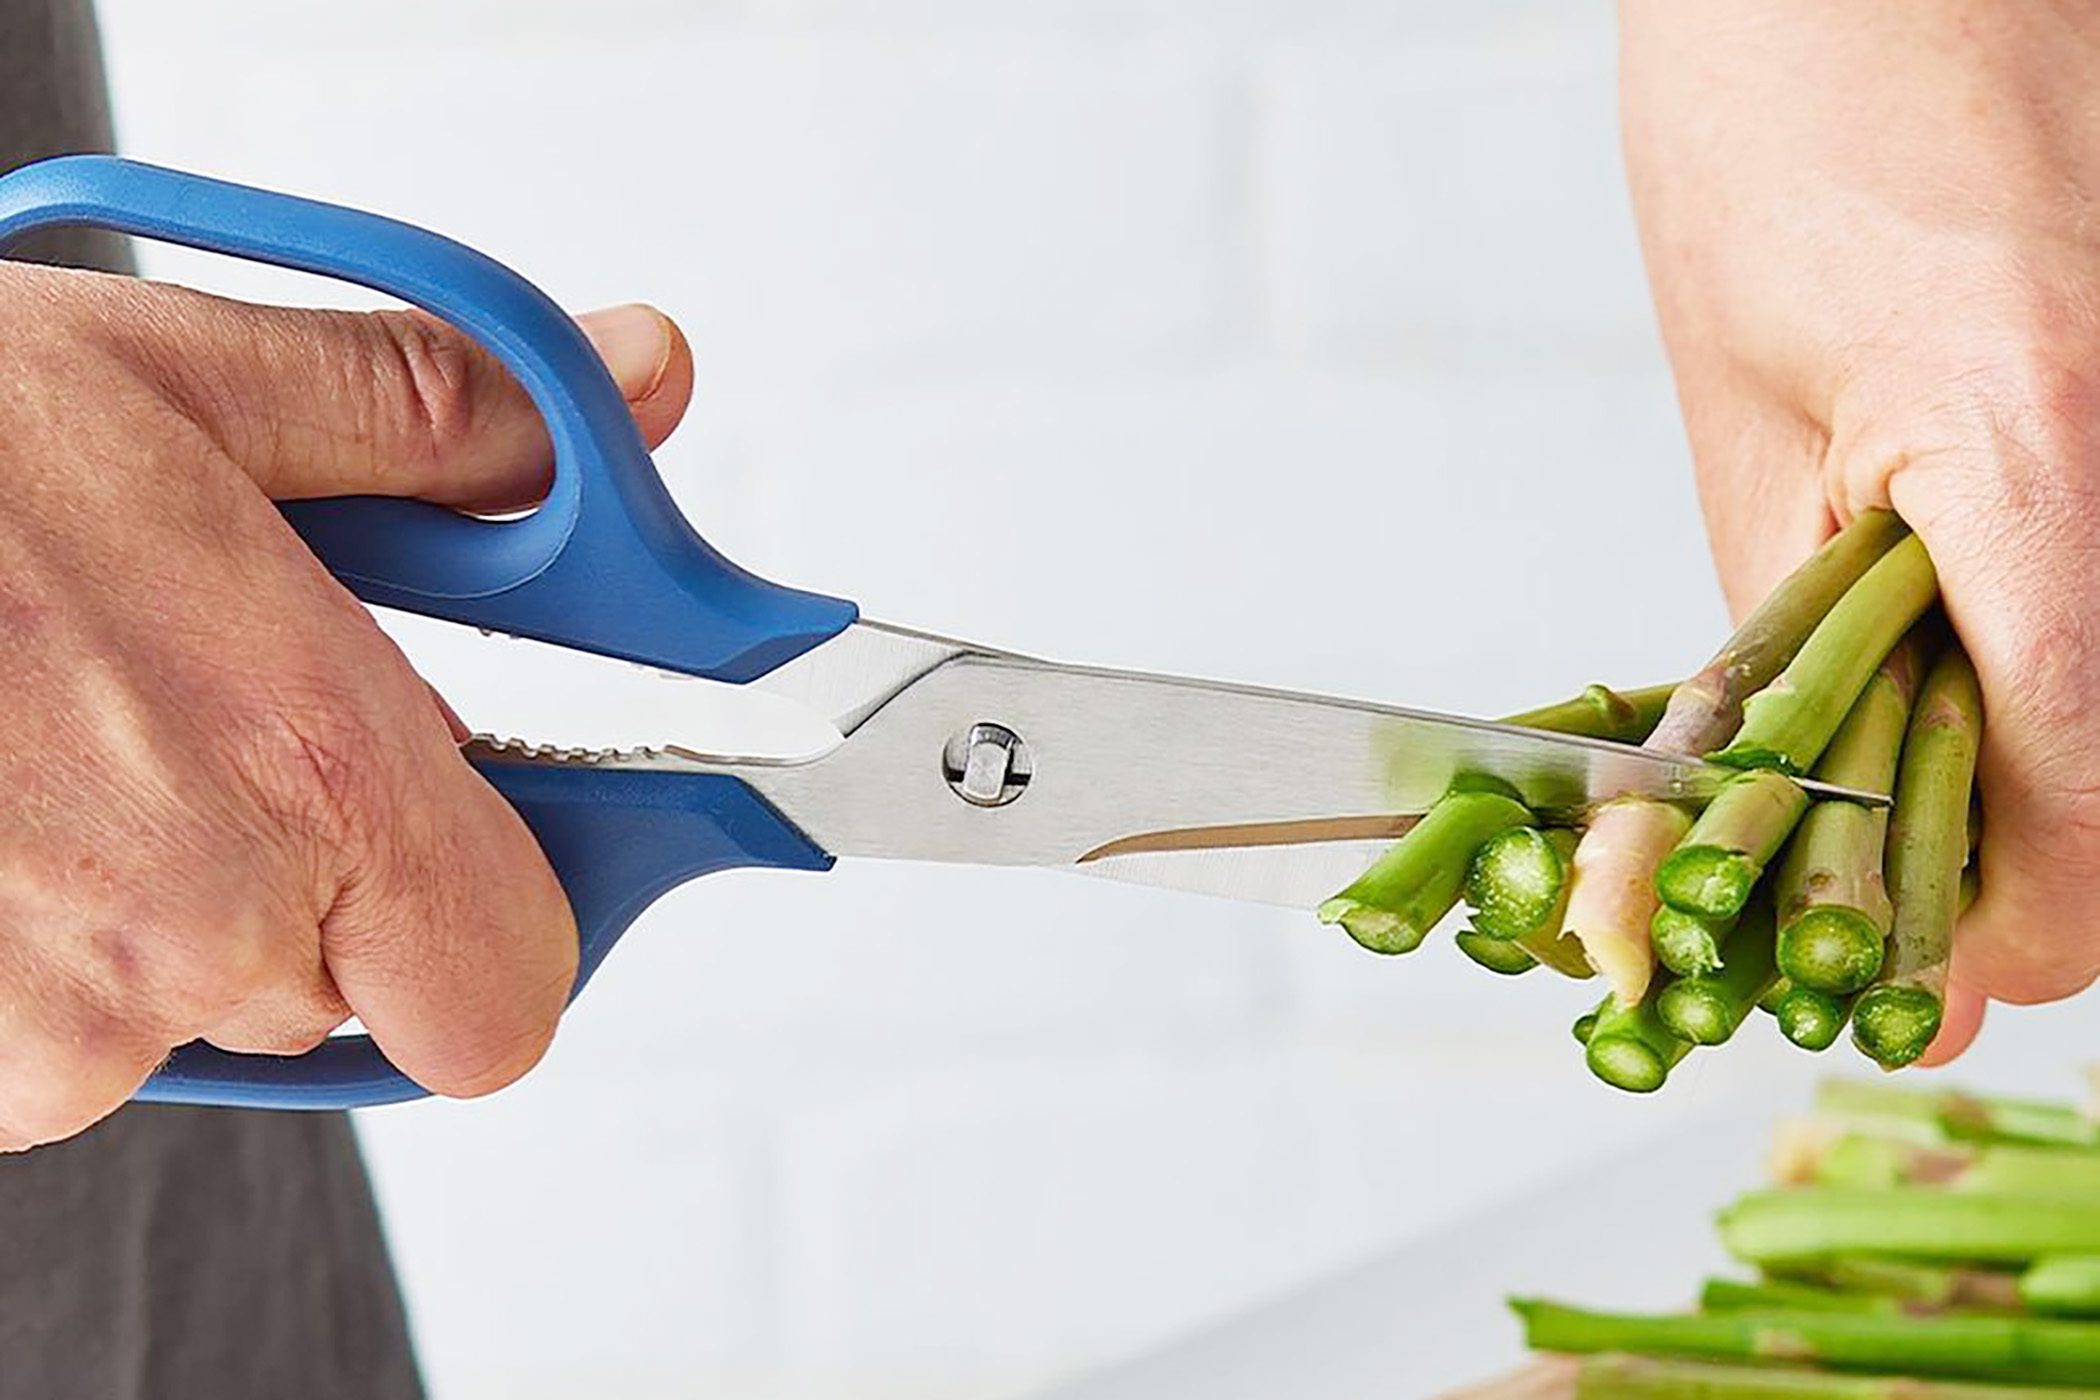 The Misen Kitchen Shears That Have Sold Out Multiple Times Are